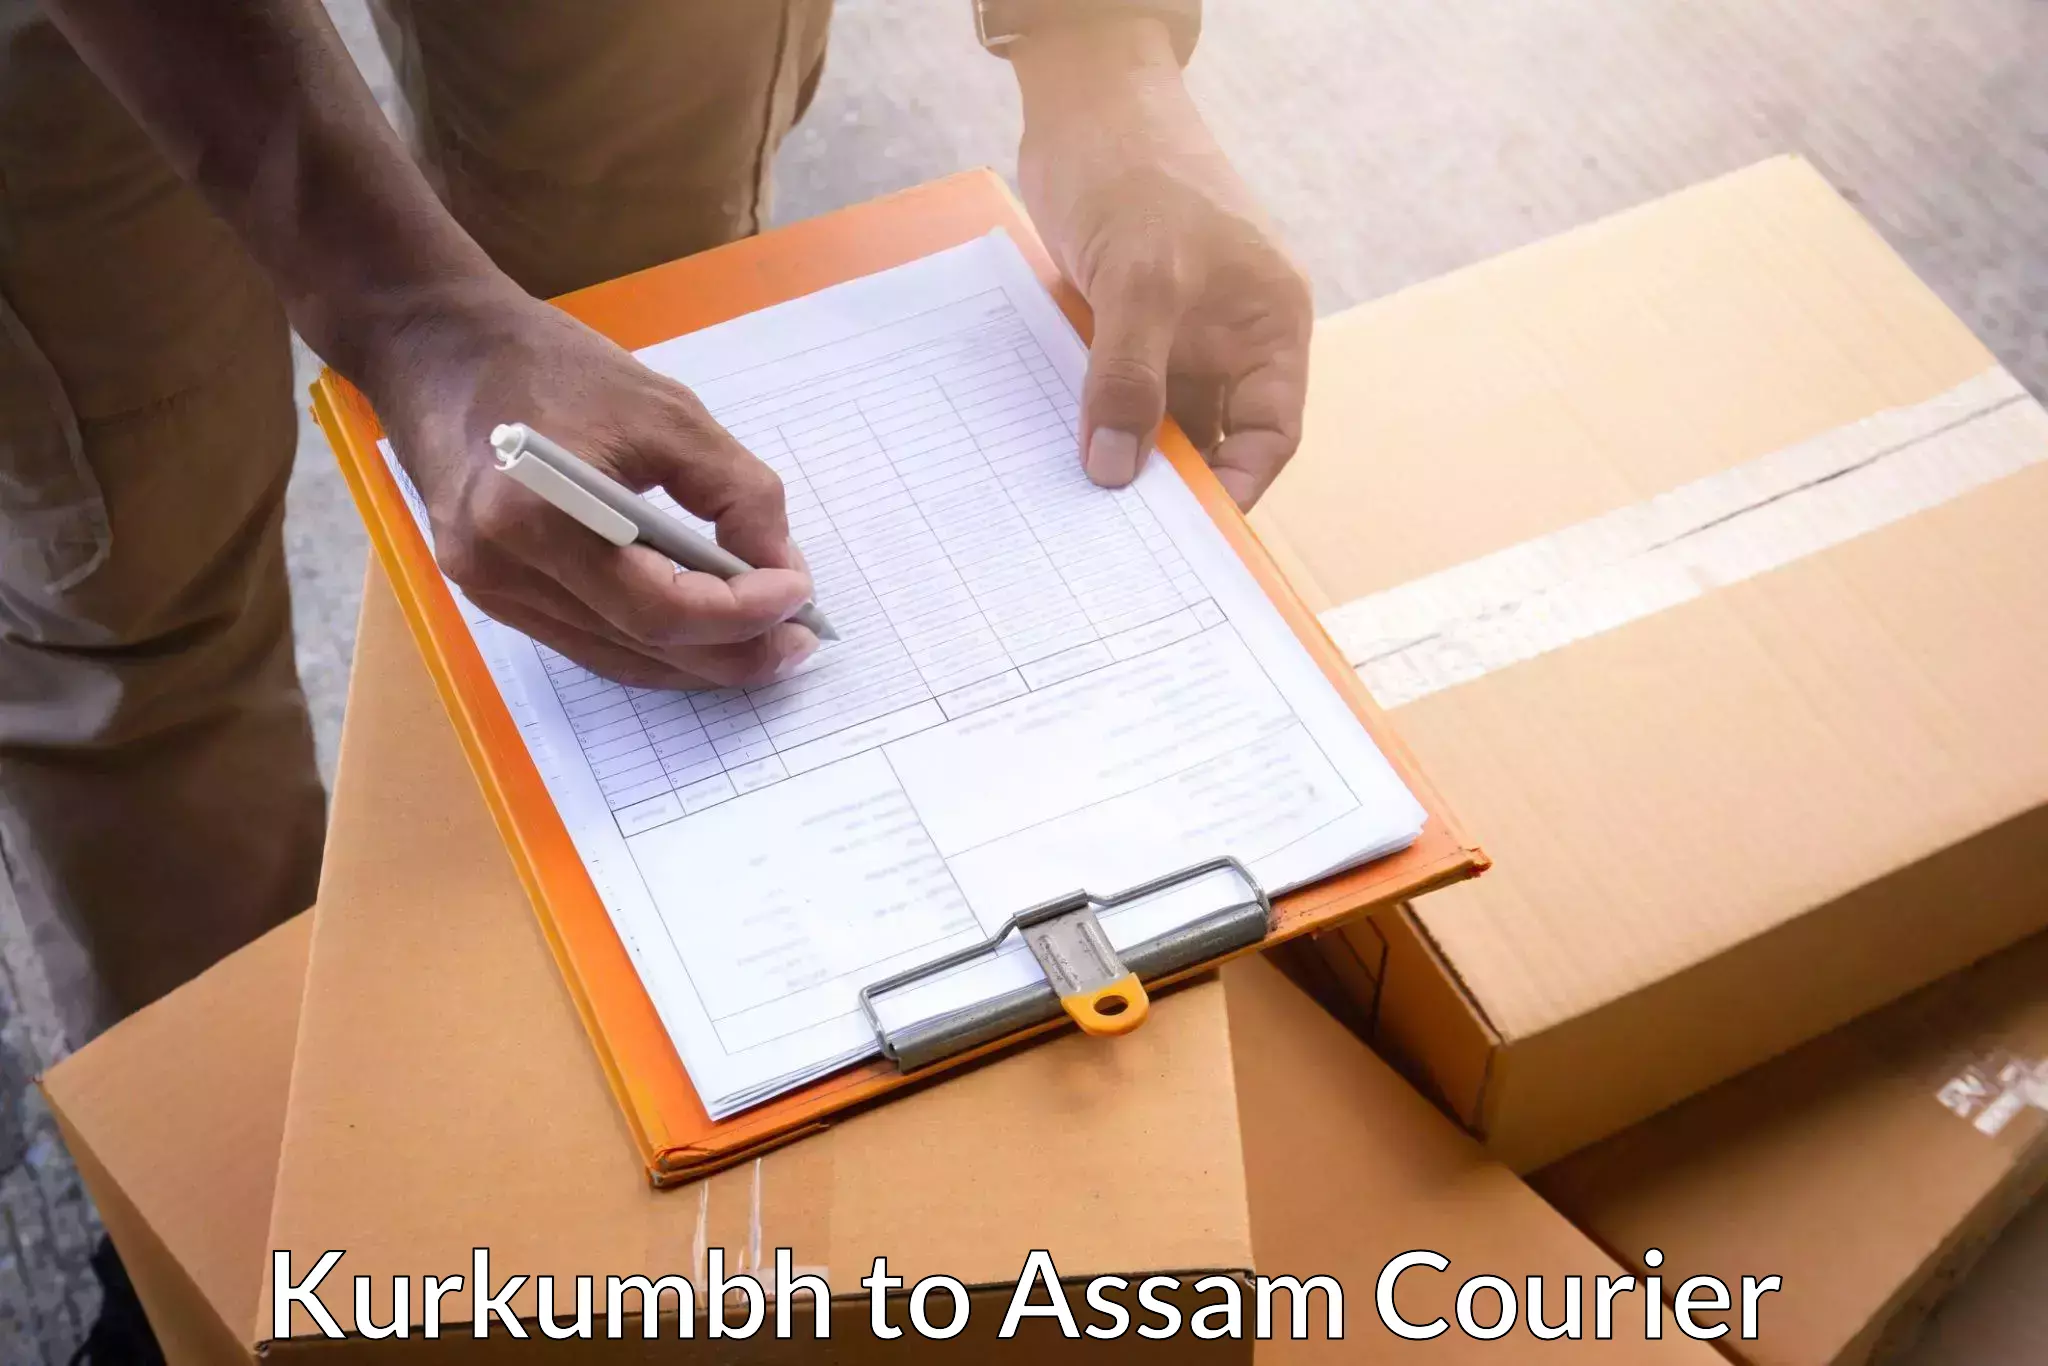 Fastest parcel delivery in Kurkumbh to Karbi Anglong